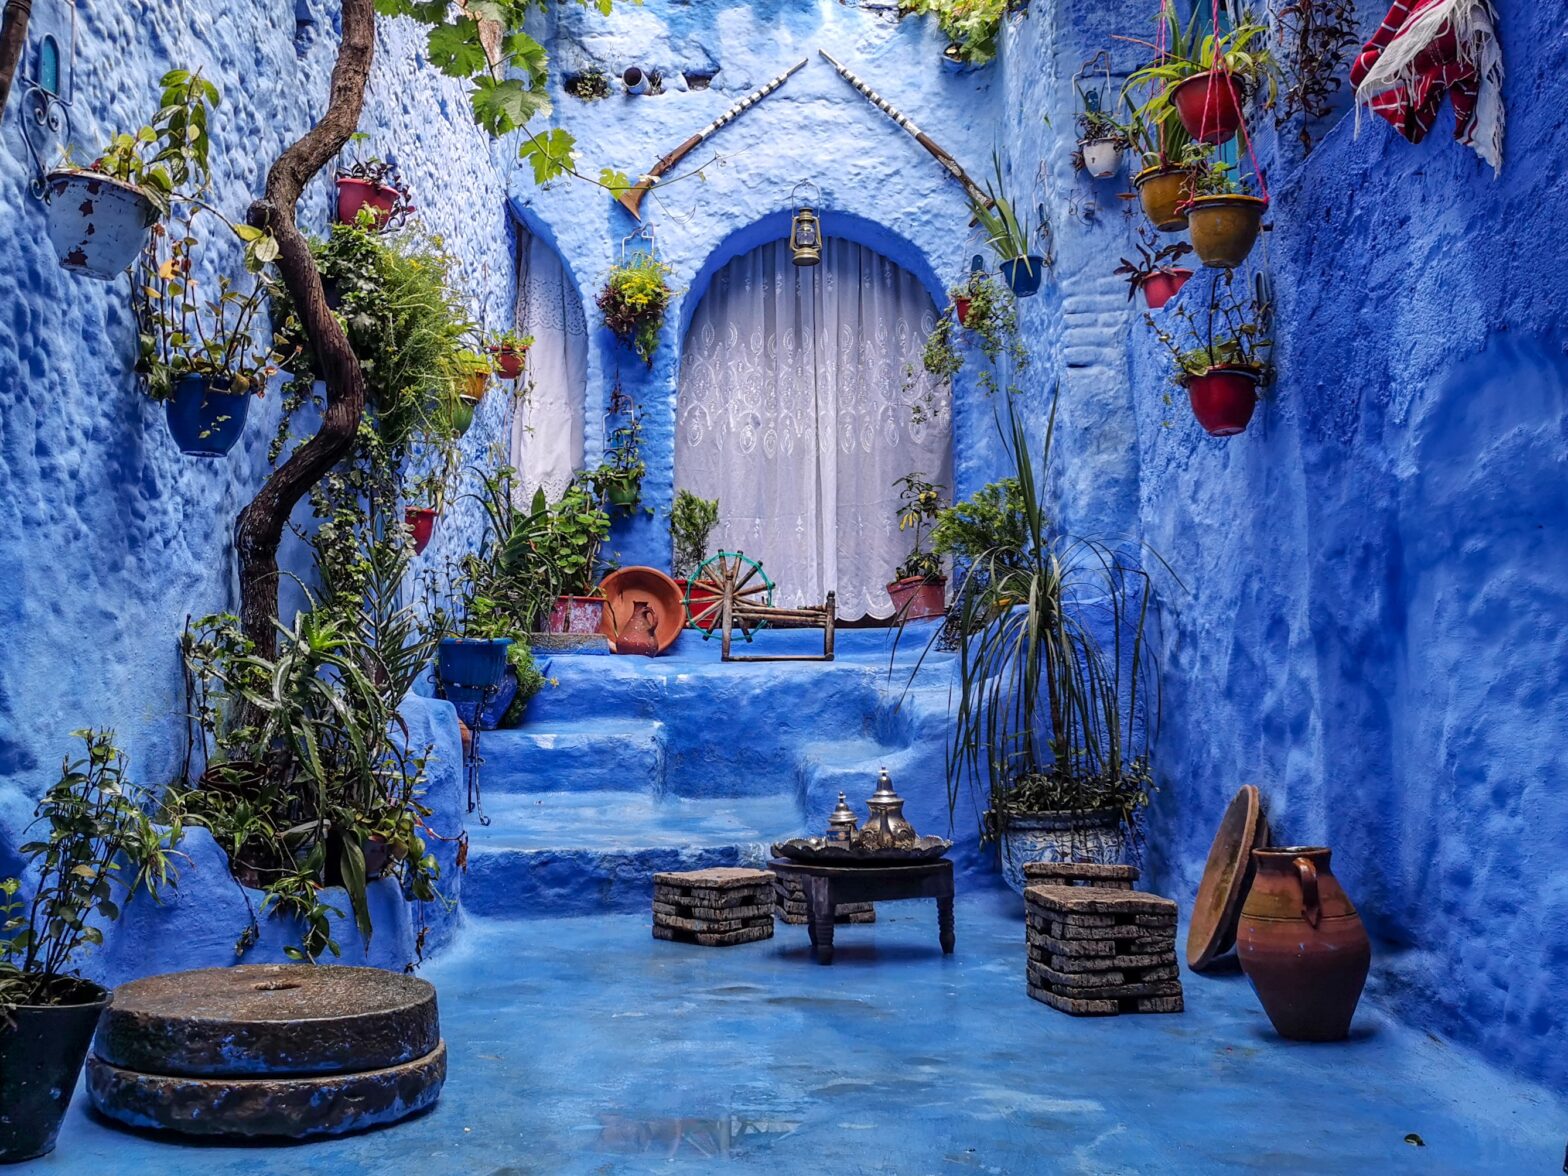 The True Story Behind Morocco's Completely Blue City